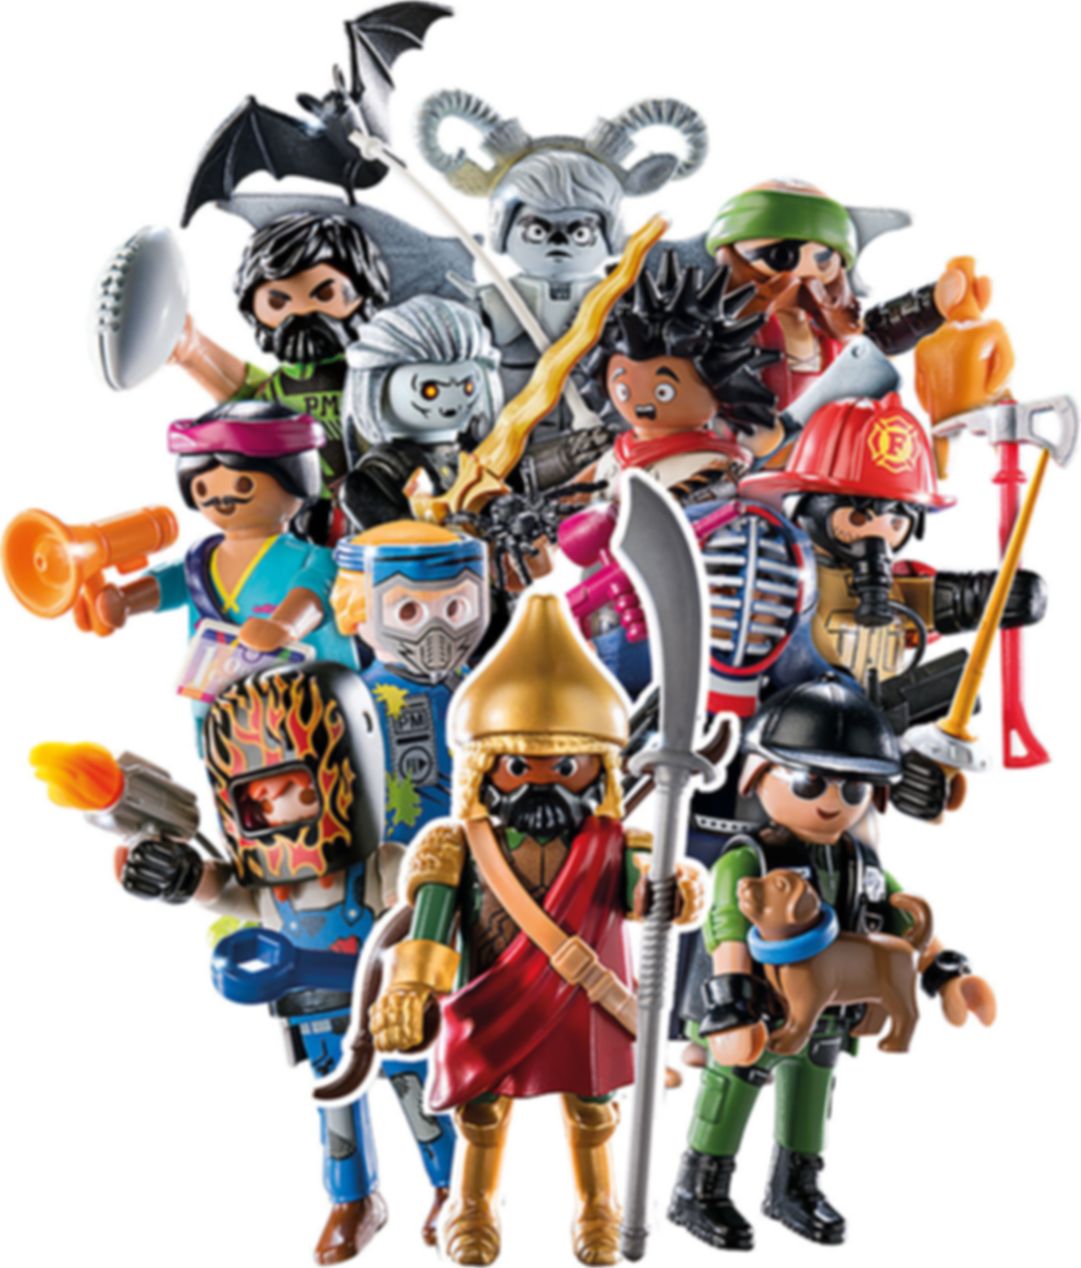 PLAYMOBIL Figures Series 21 - Boys components